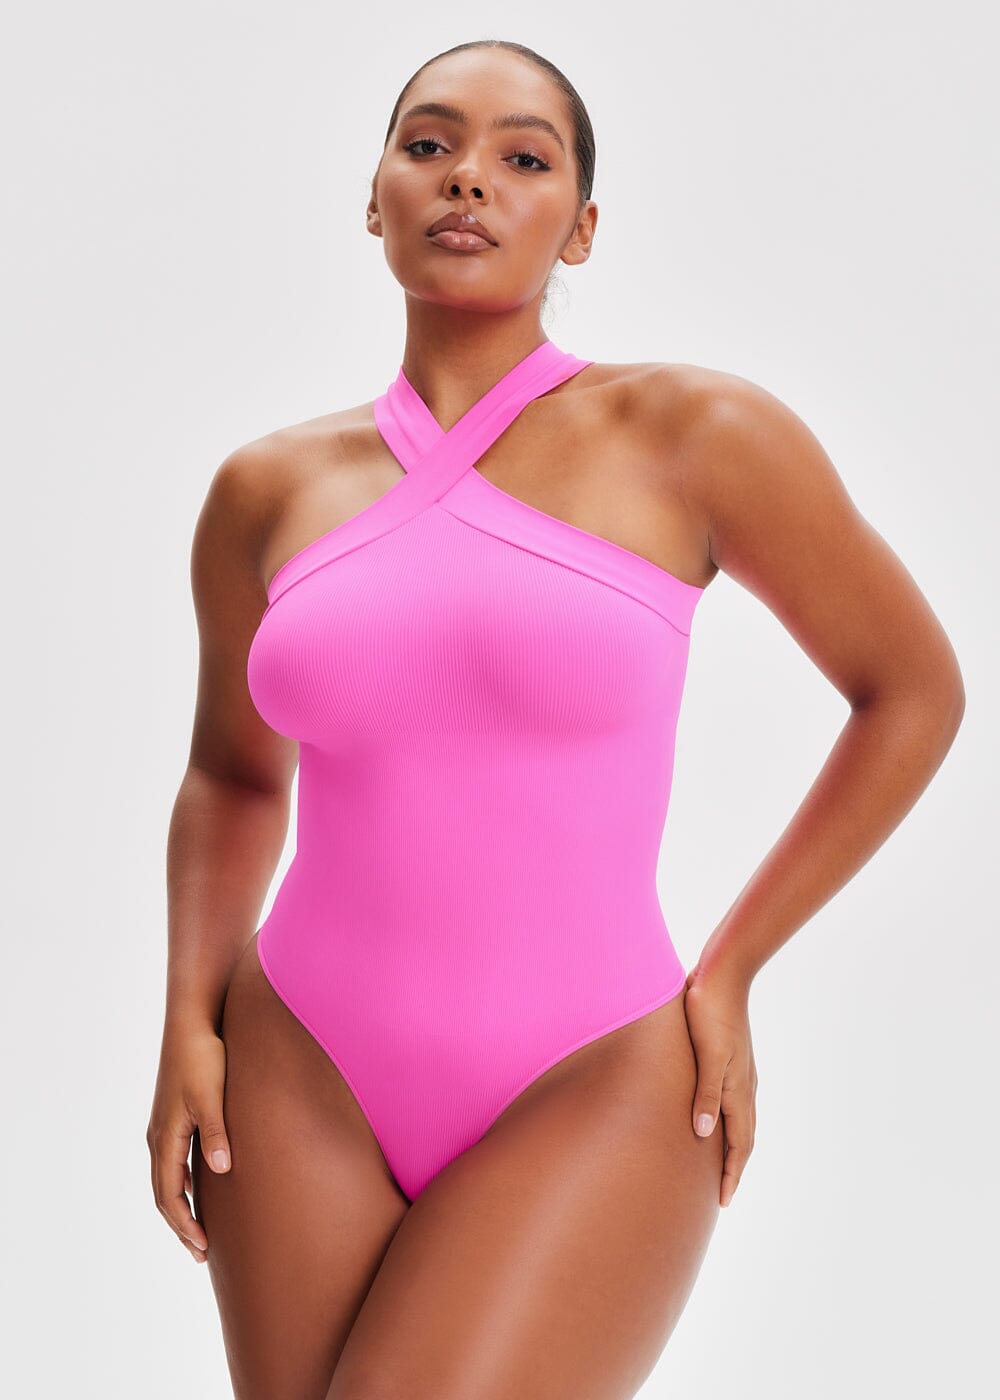 Spanx Halter Ruched Sides One Piece Slimming Swimsuit Size US14/UK 18 Berry  Pink